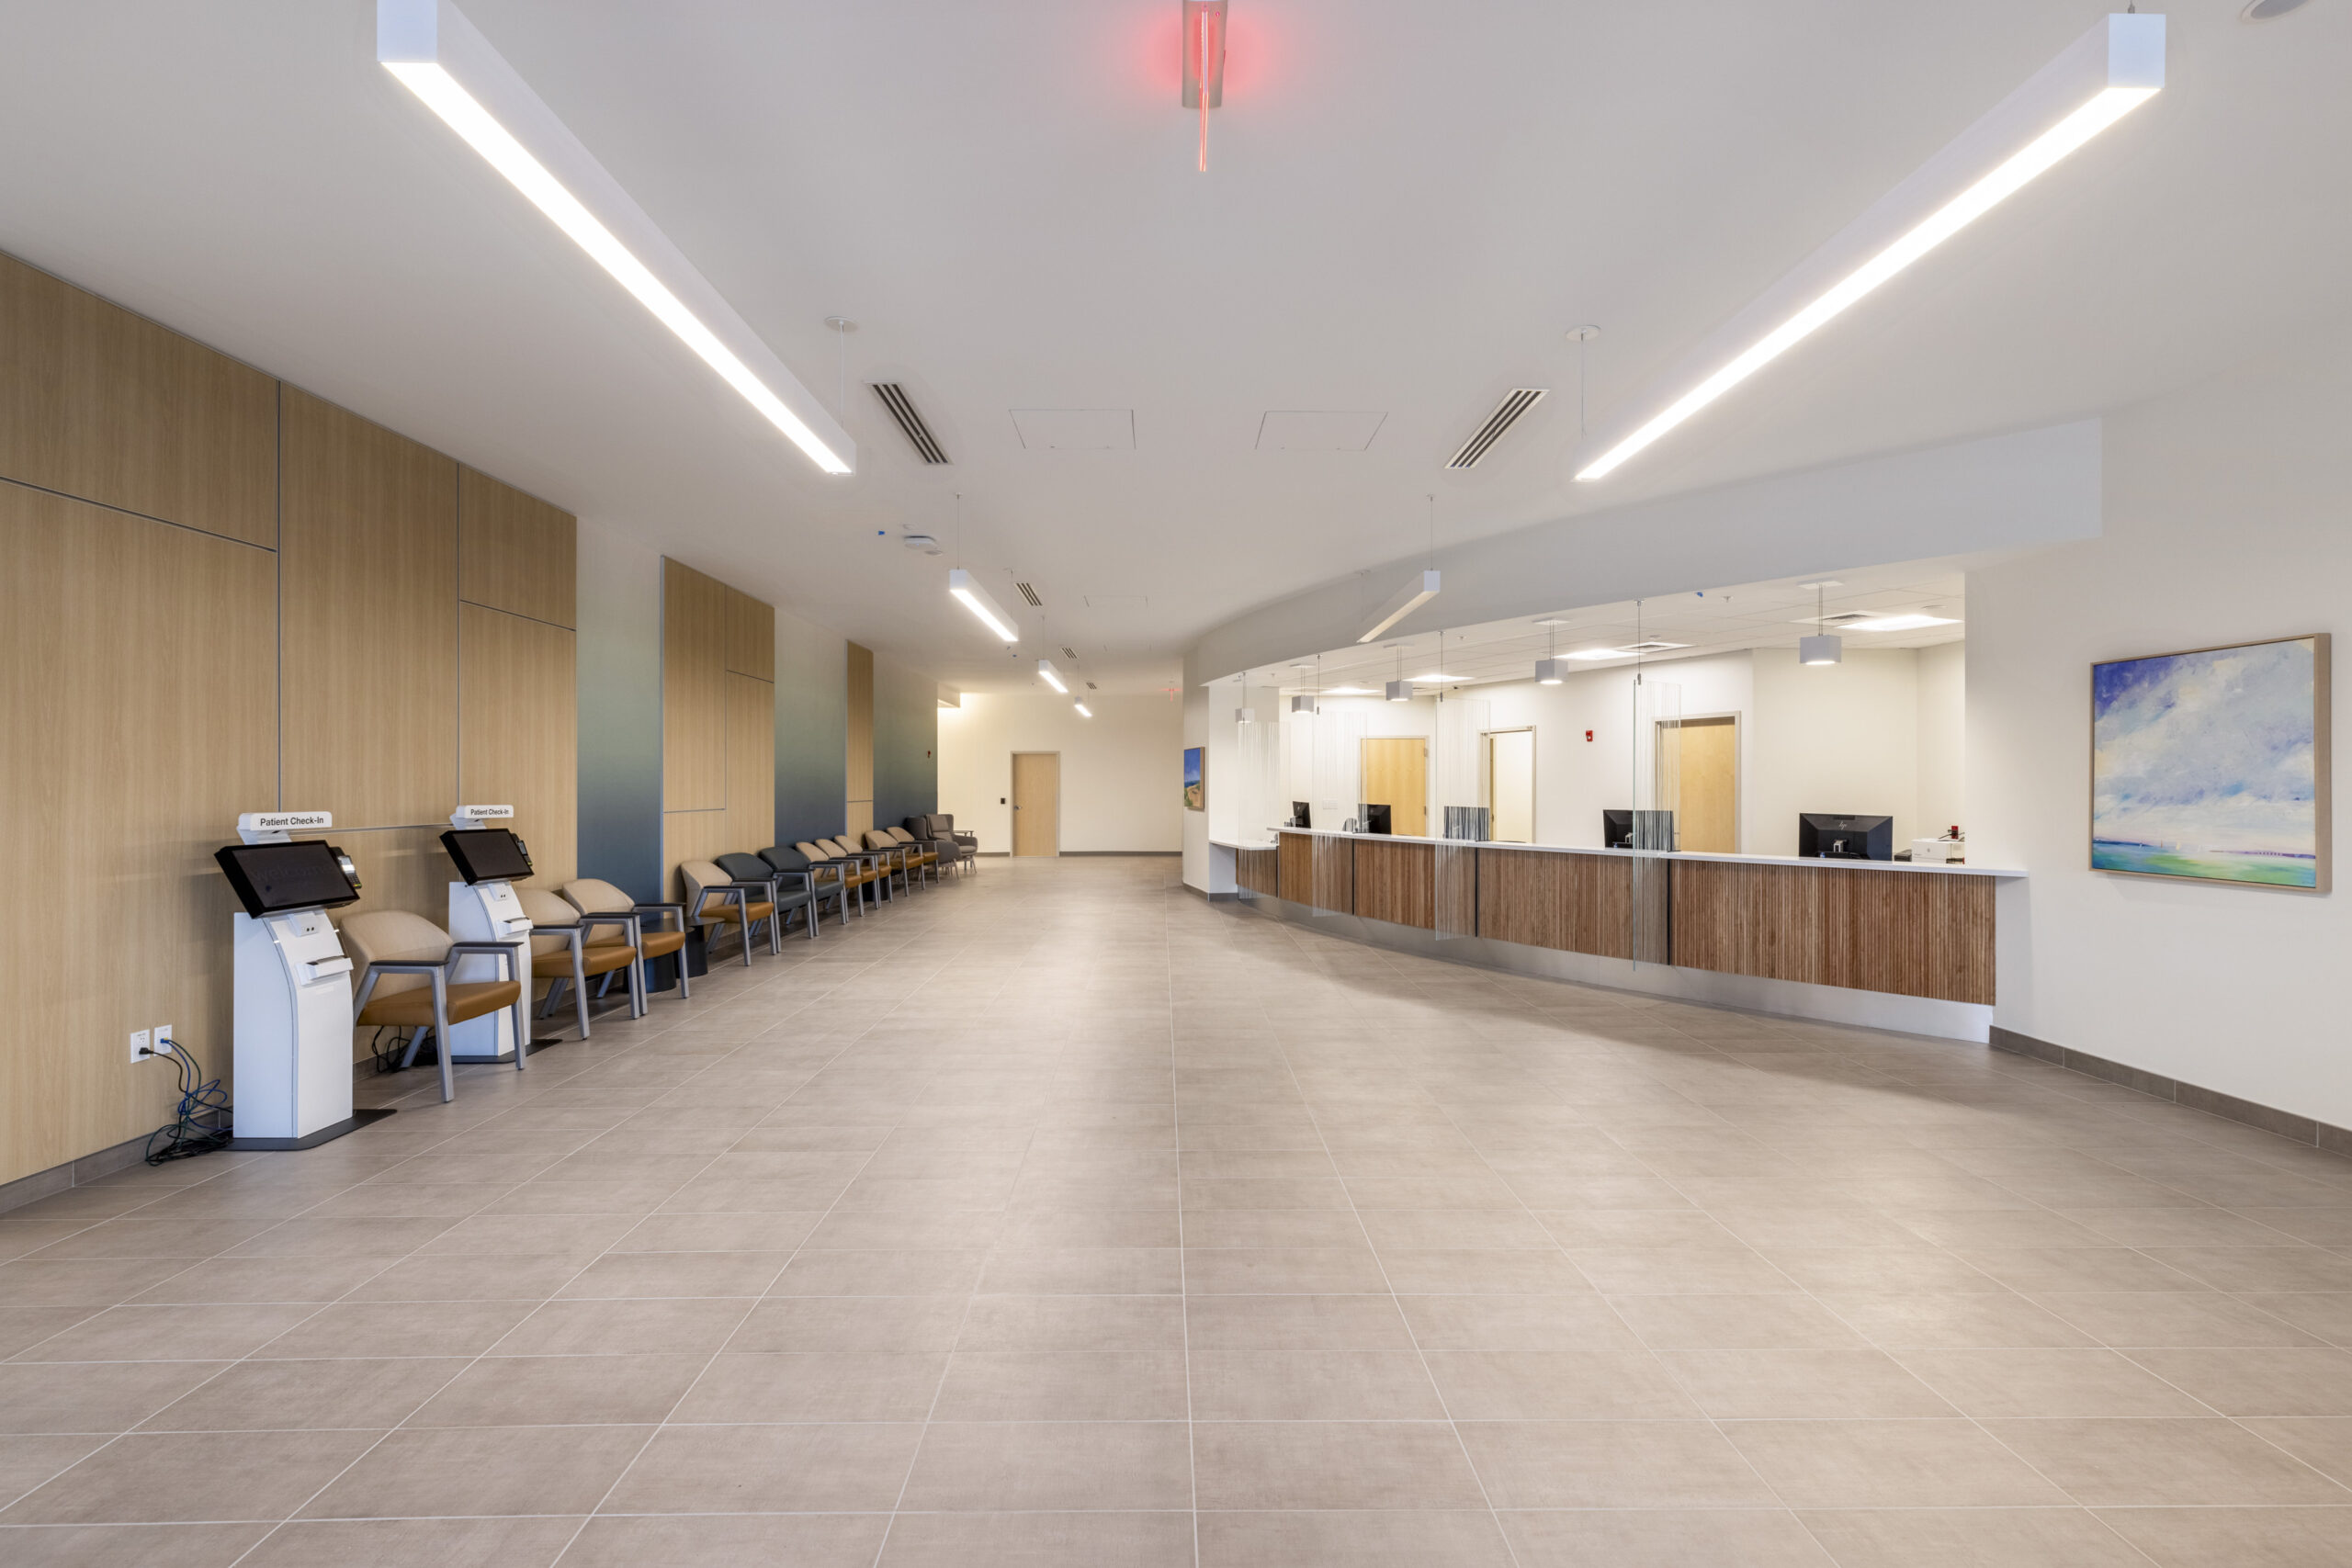 Speed to Square Footage: Wise Completes 50,000 SF Multi-Specialty Outpatient Clinic in 10 Months